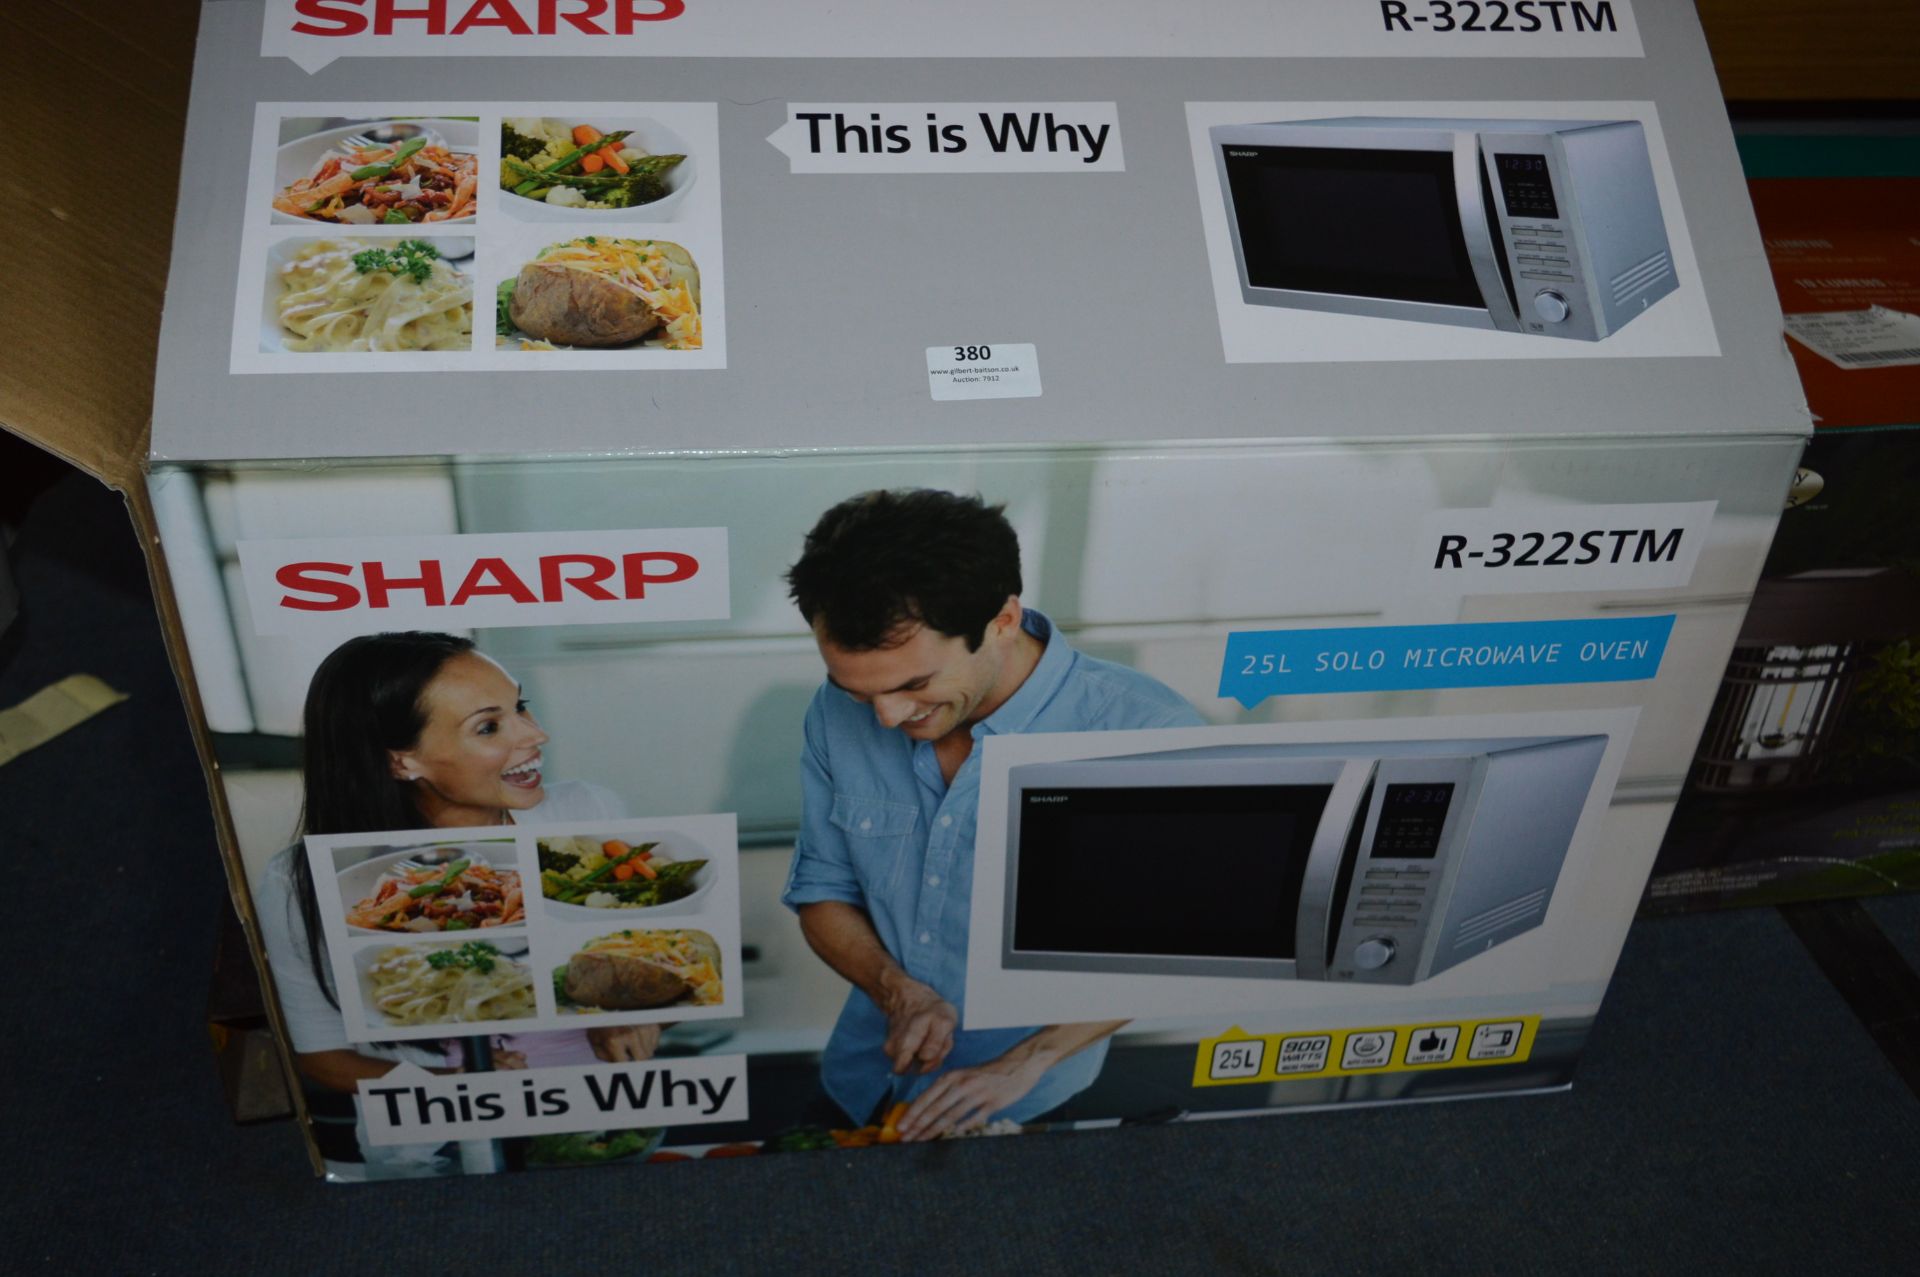 *Sharp Solo Microwave Oven